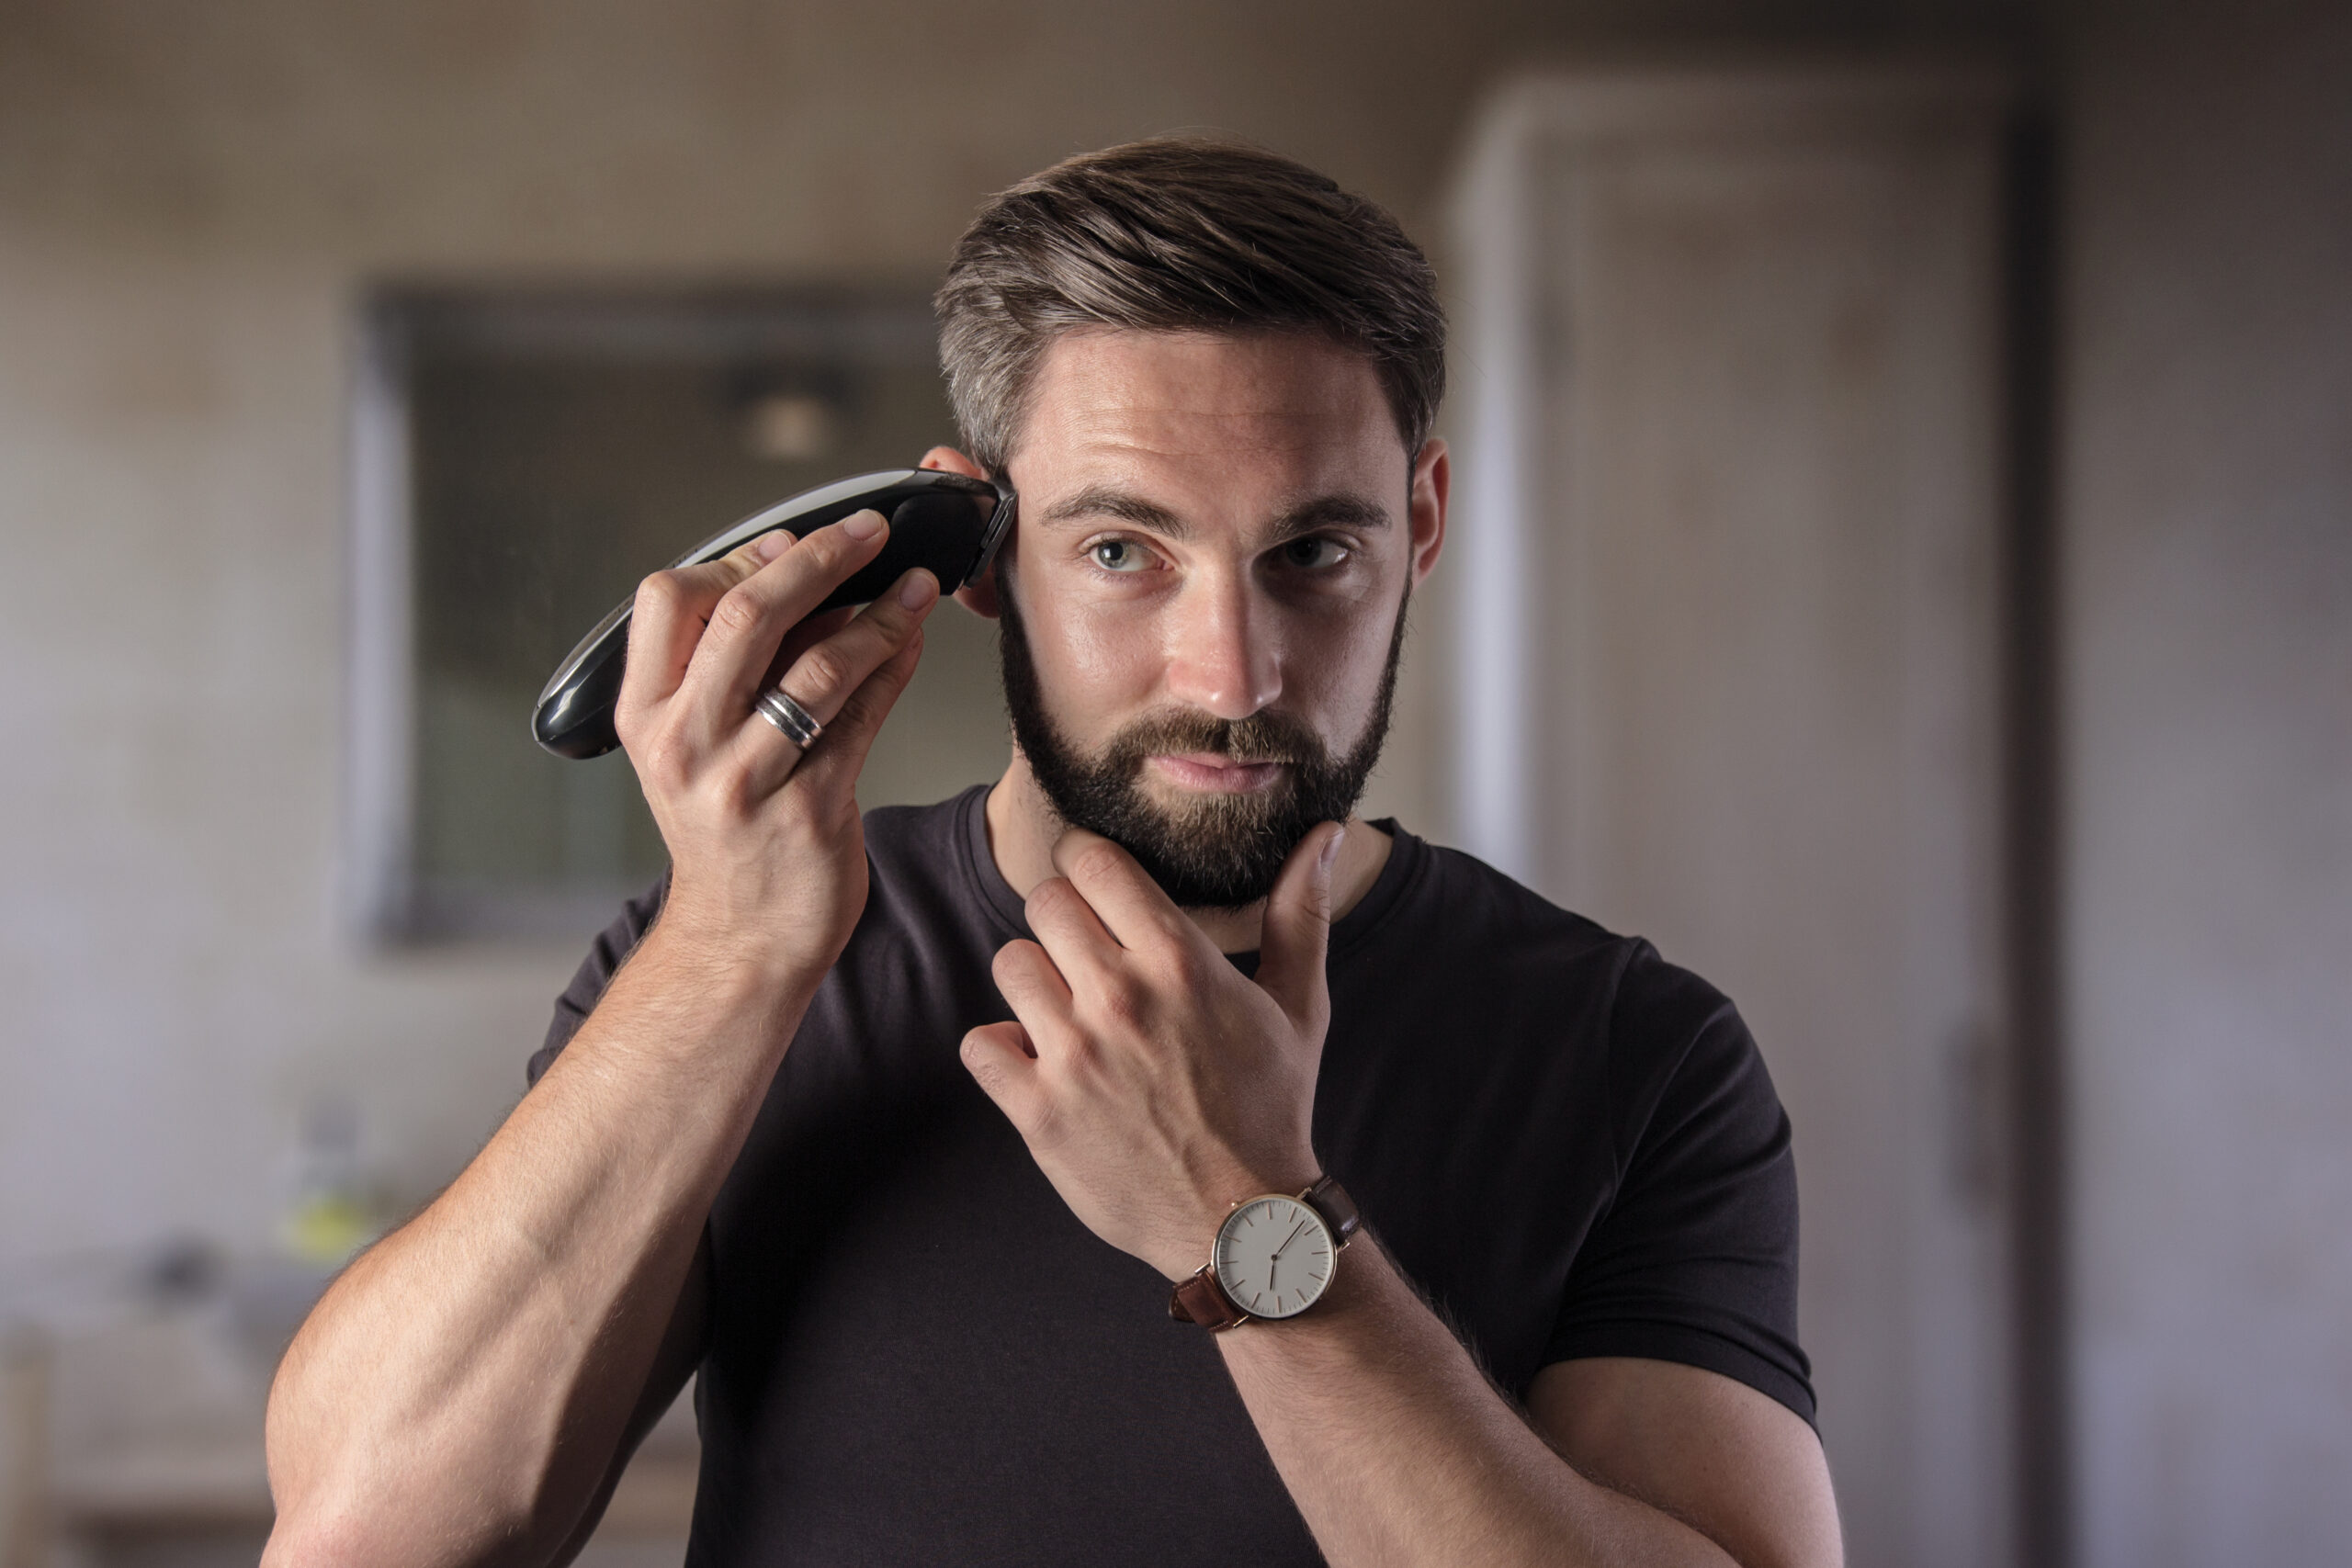 Power Clipper by Wahl